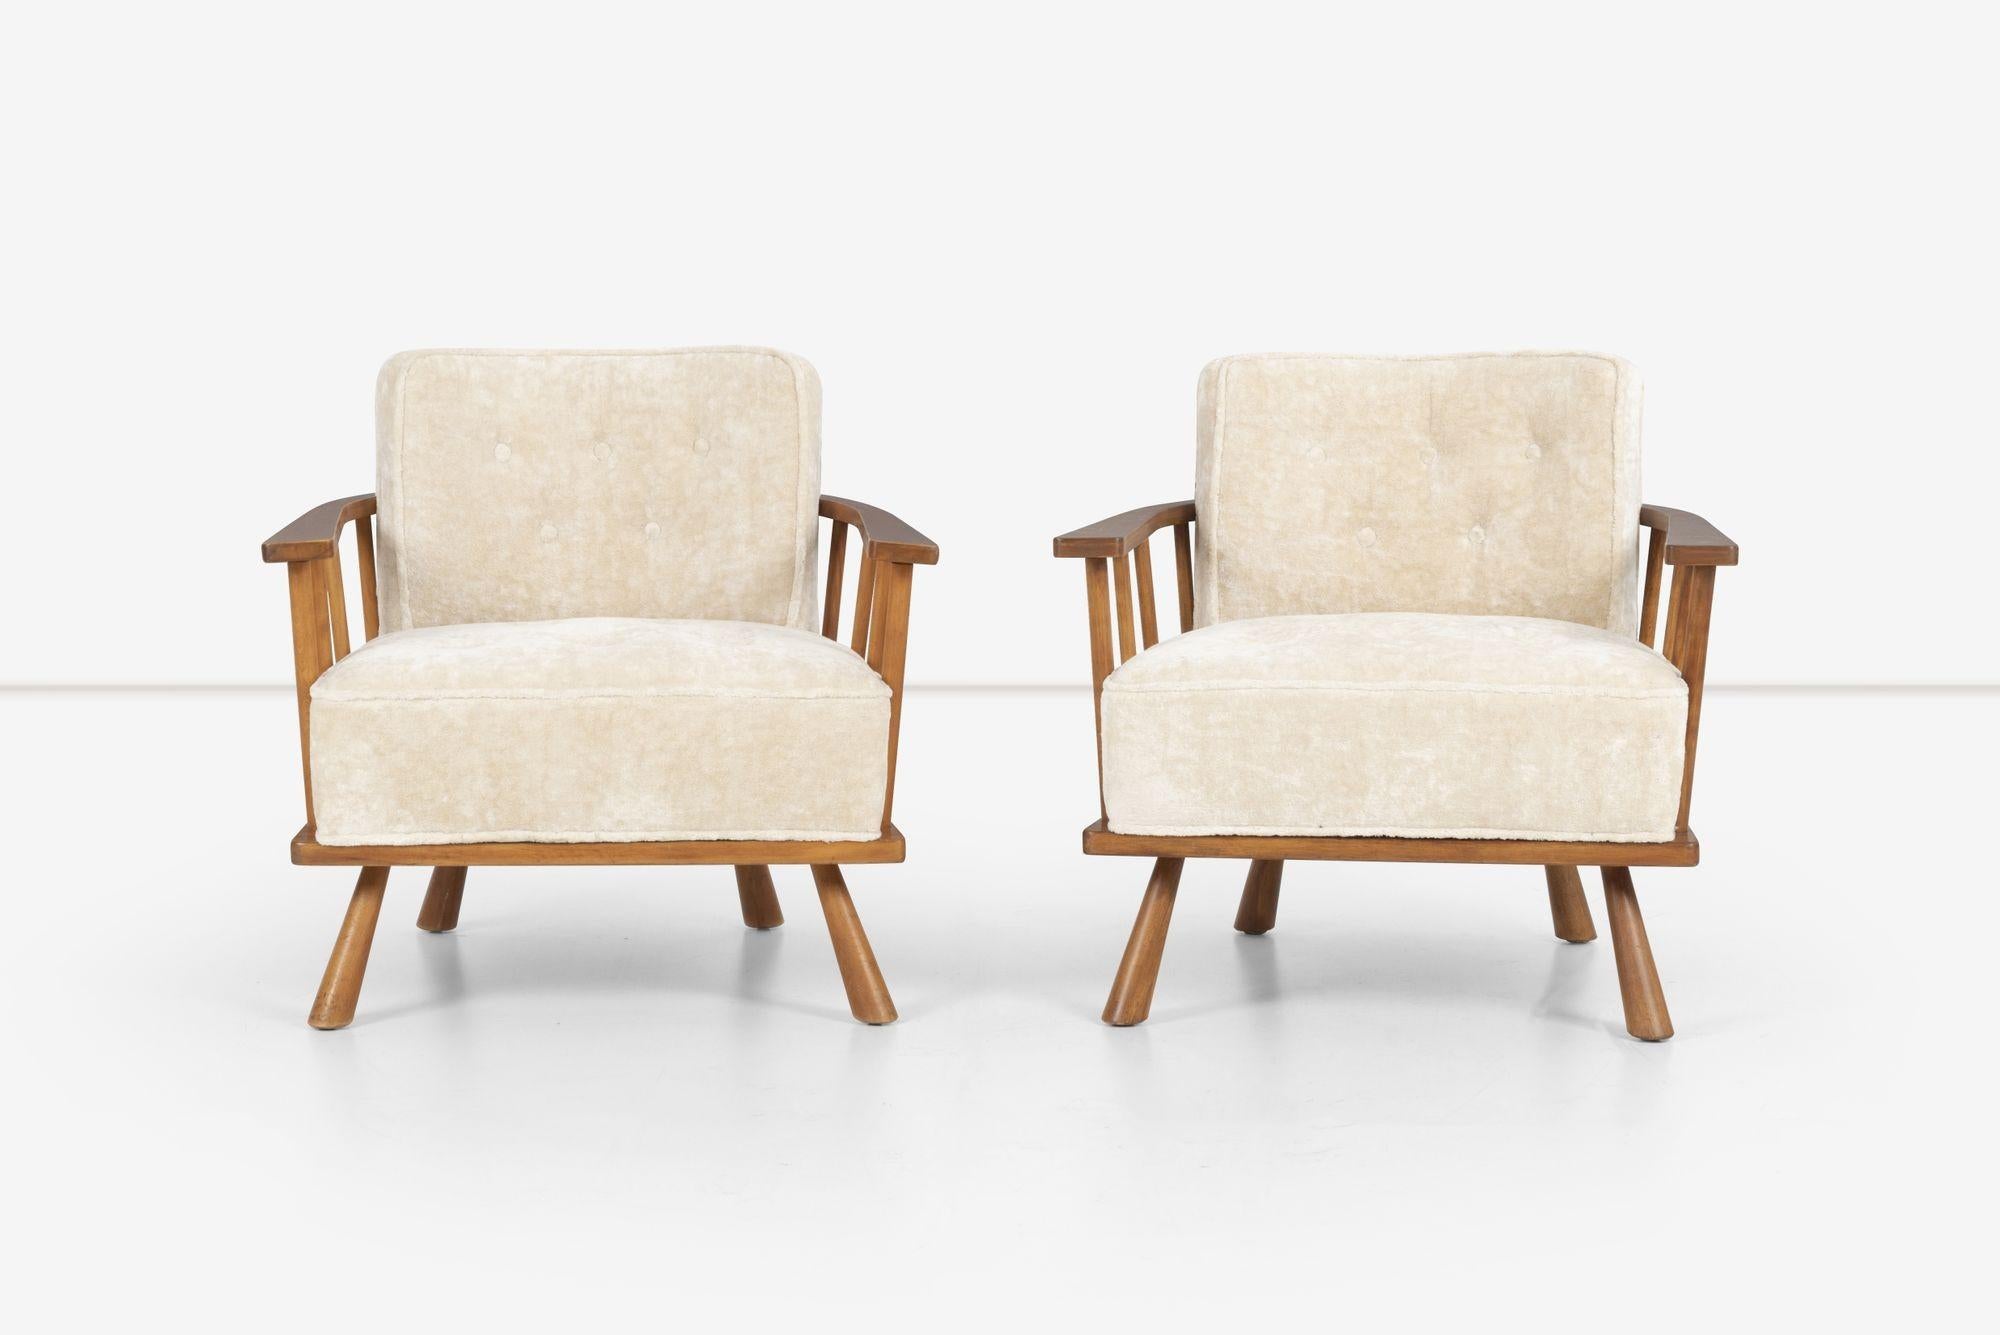 Pair of Robsjohn-Gibbings, for Widdicomb Lounge Chairs, Model 1651. Frame made of solid maple spindles which secure tub, reupholstered with heavy plush cotton, button, with solid turned legs.
 
Seat height: 16.5